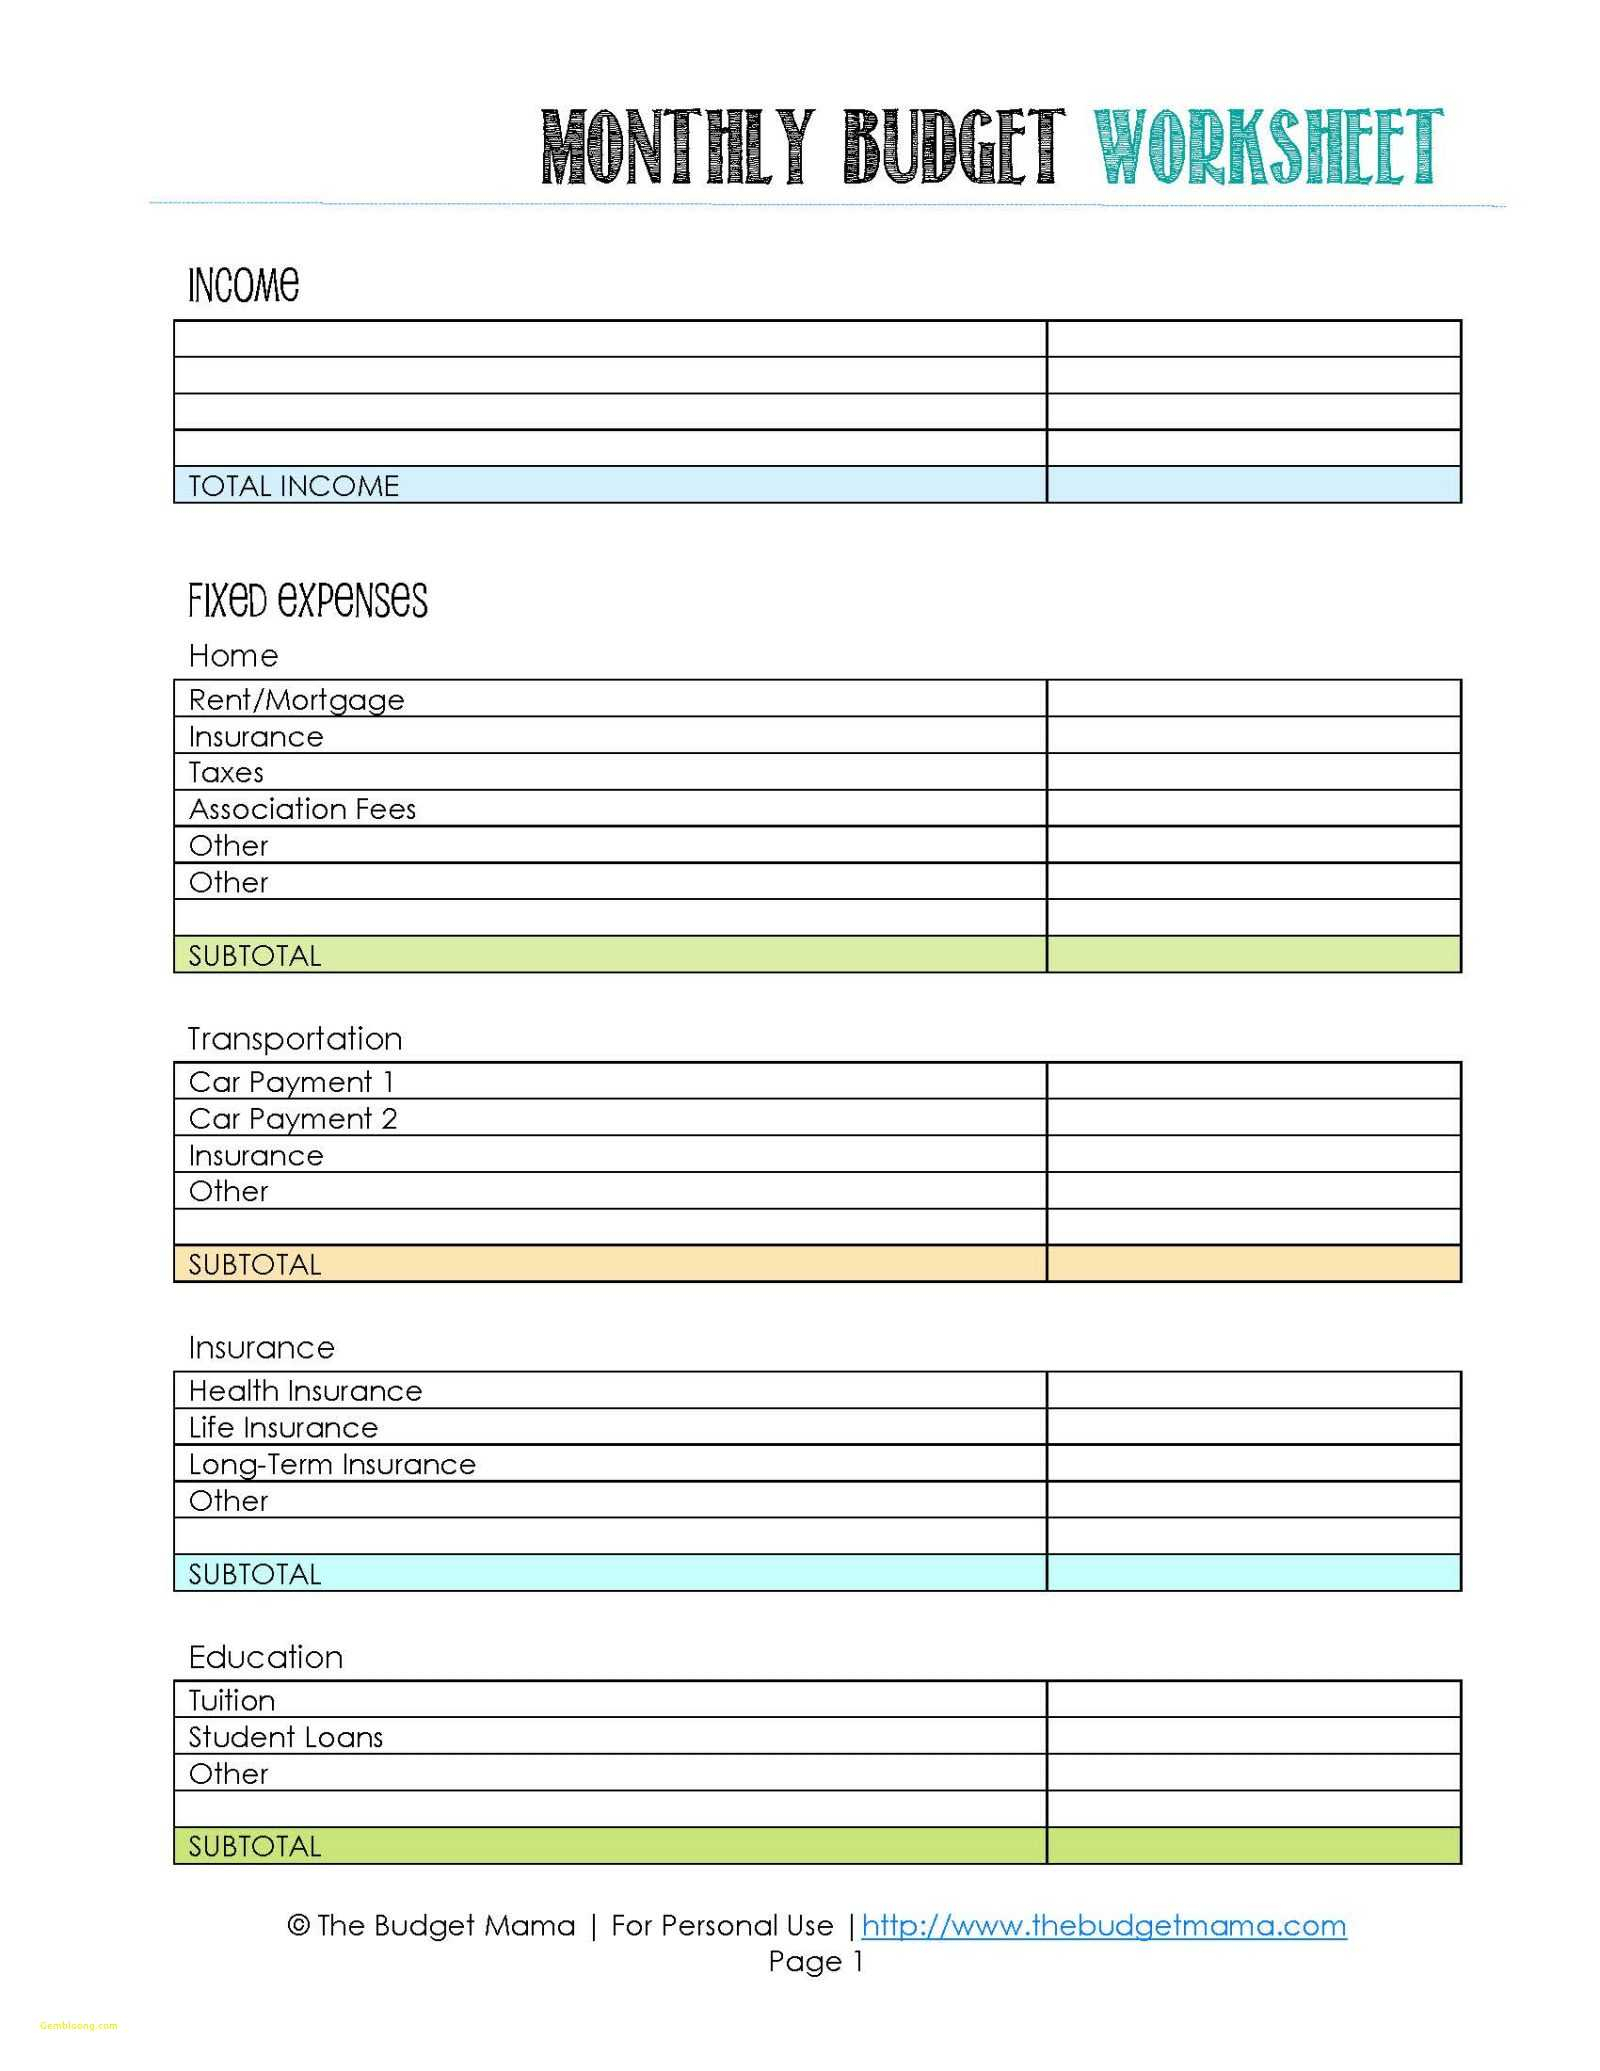 Mortgage Budget Planner Spreadsheet Throughout Excel Spreadsheet Budget Planner Together With Spreadsheet Examples